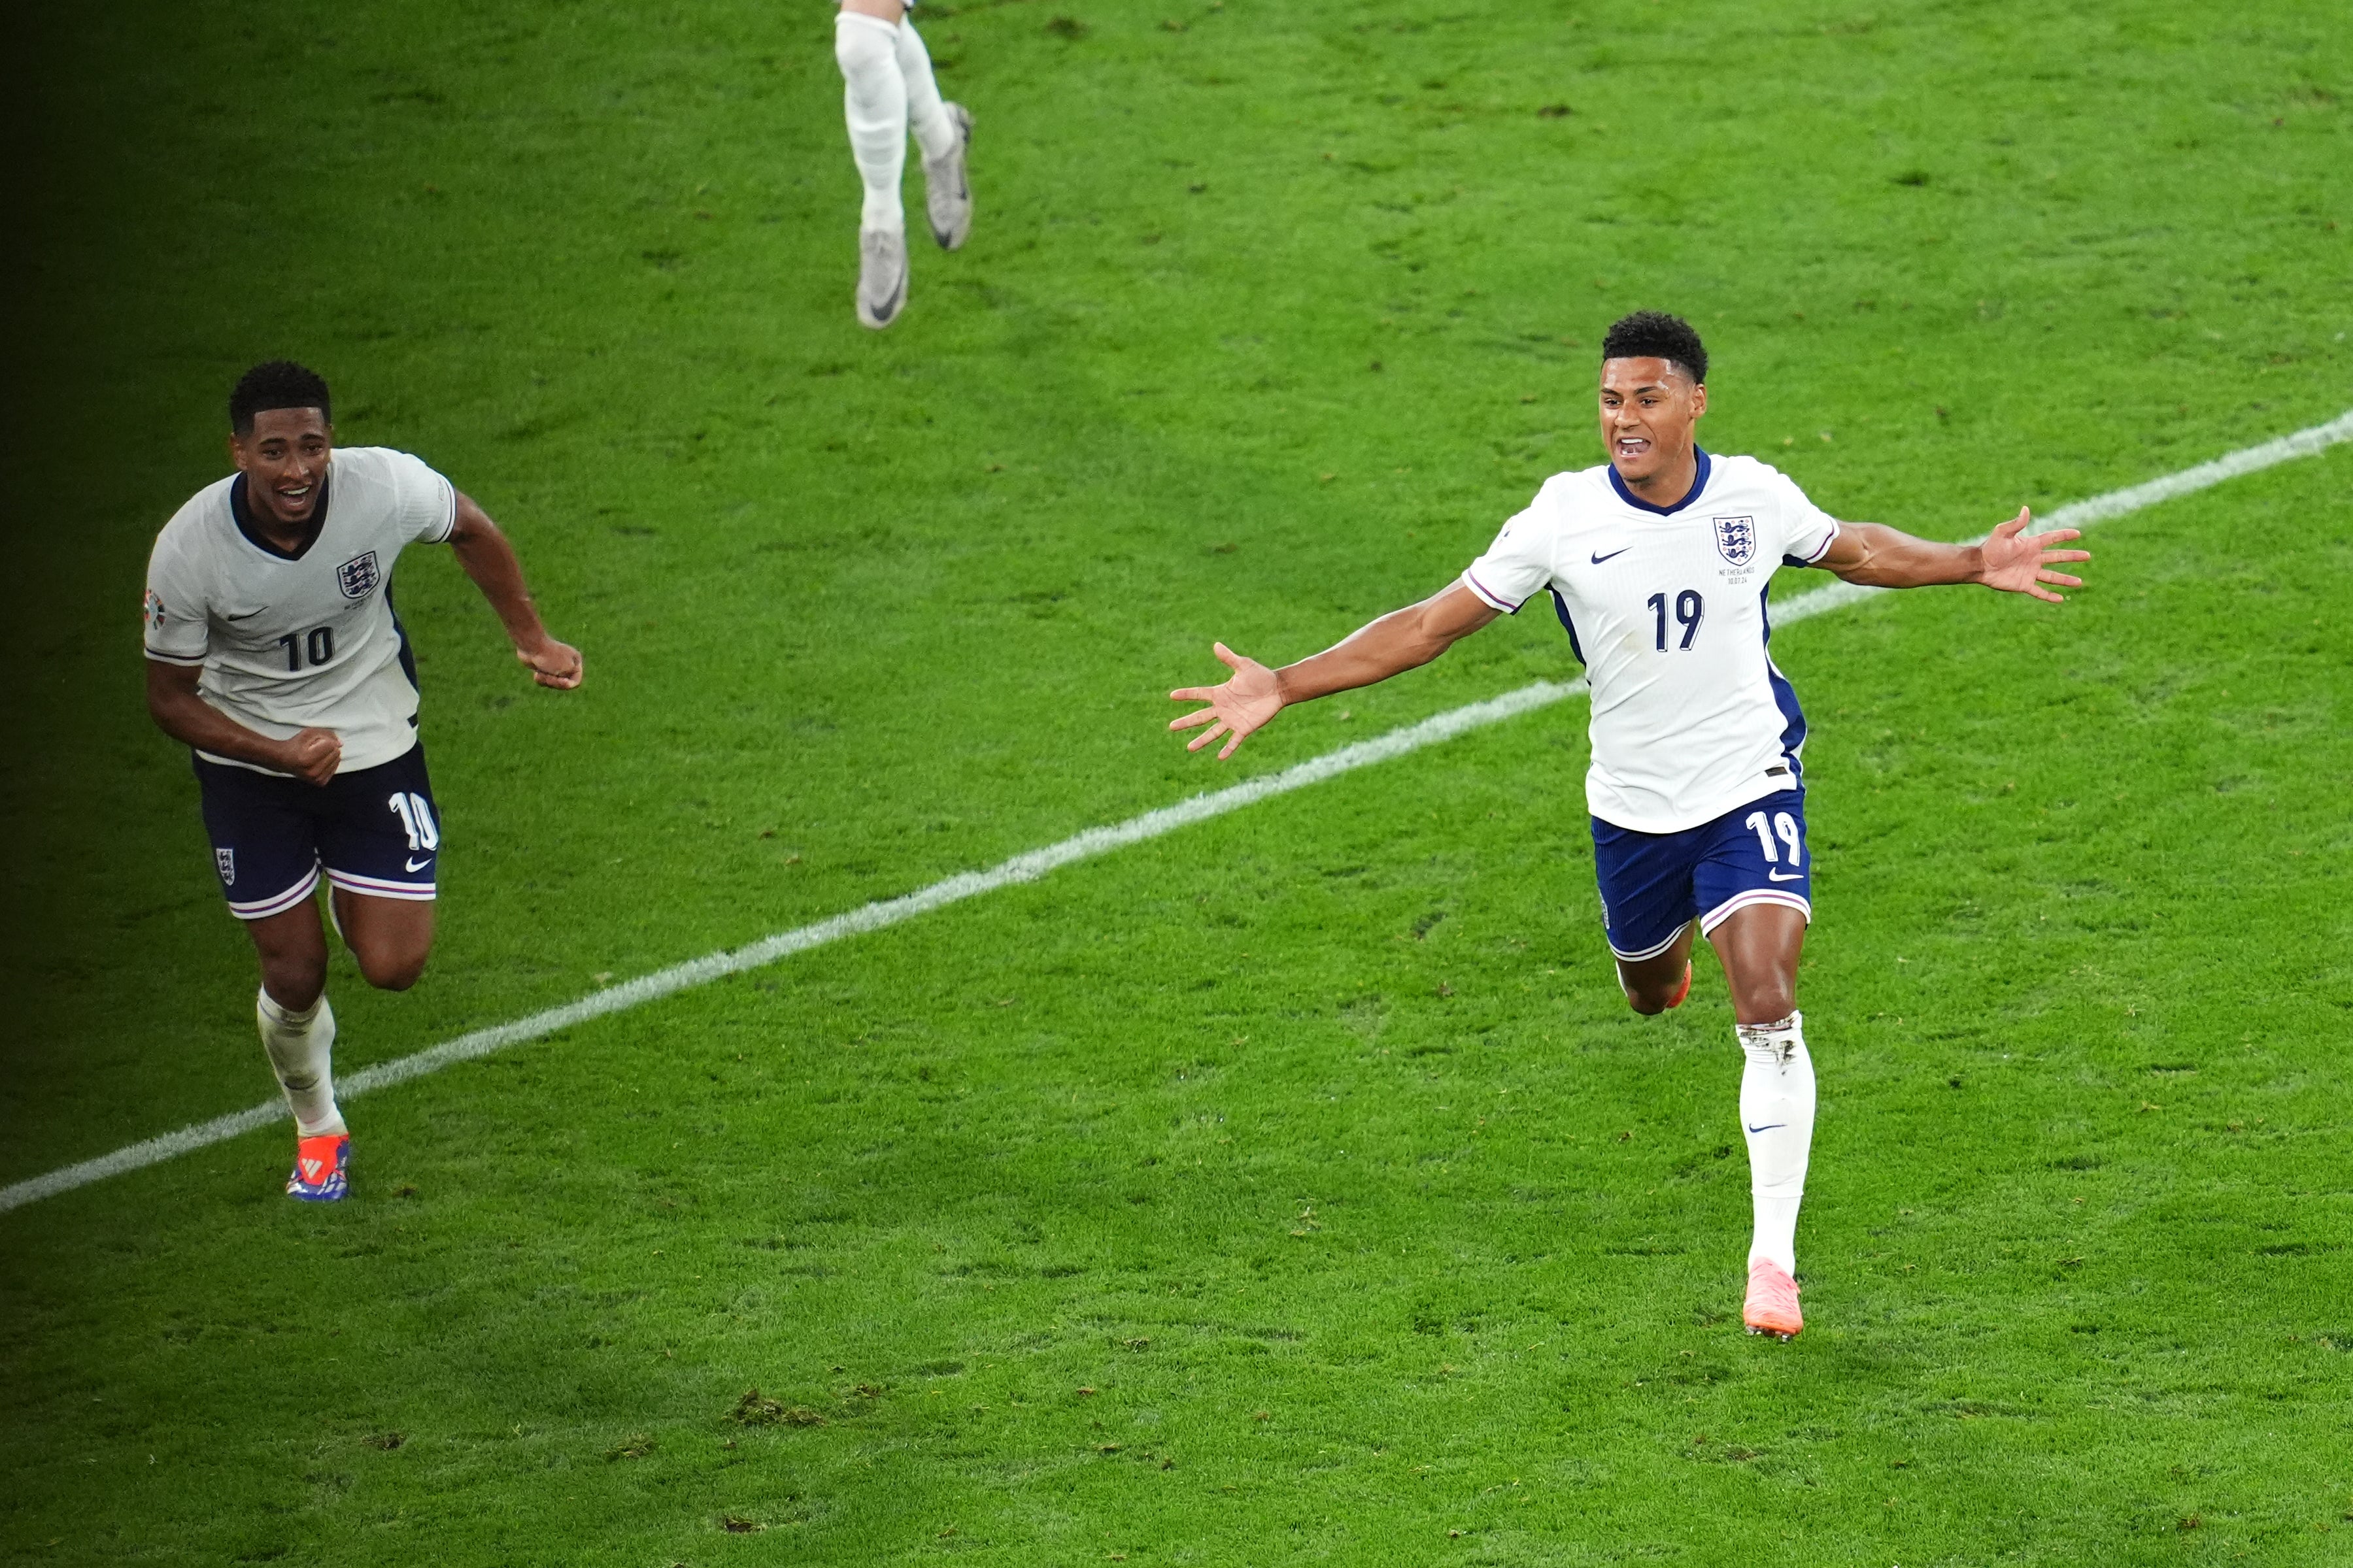 Jude Bellingham, left, gave chase after Ollie Watkins sealed England’s dramatic win (Adam Davy/PA)